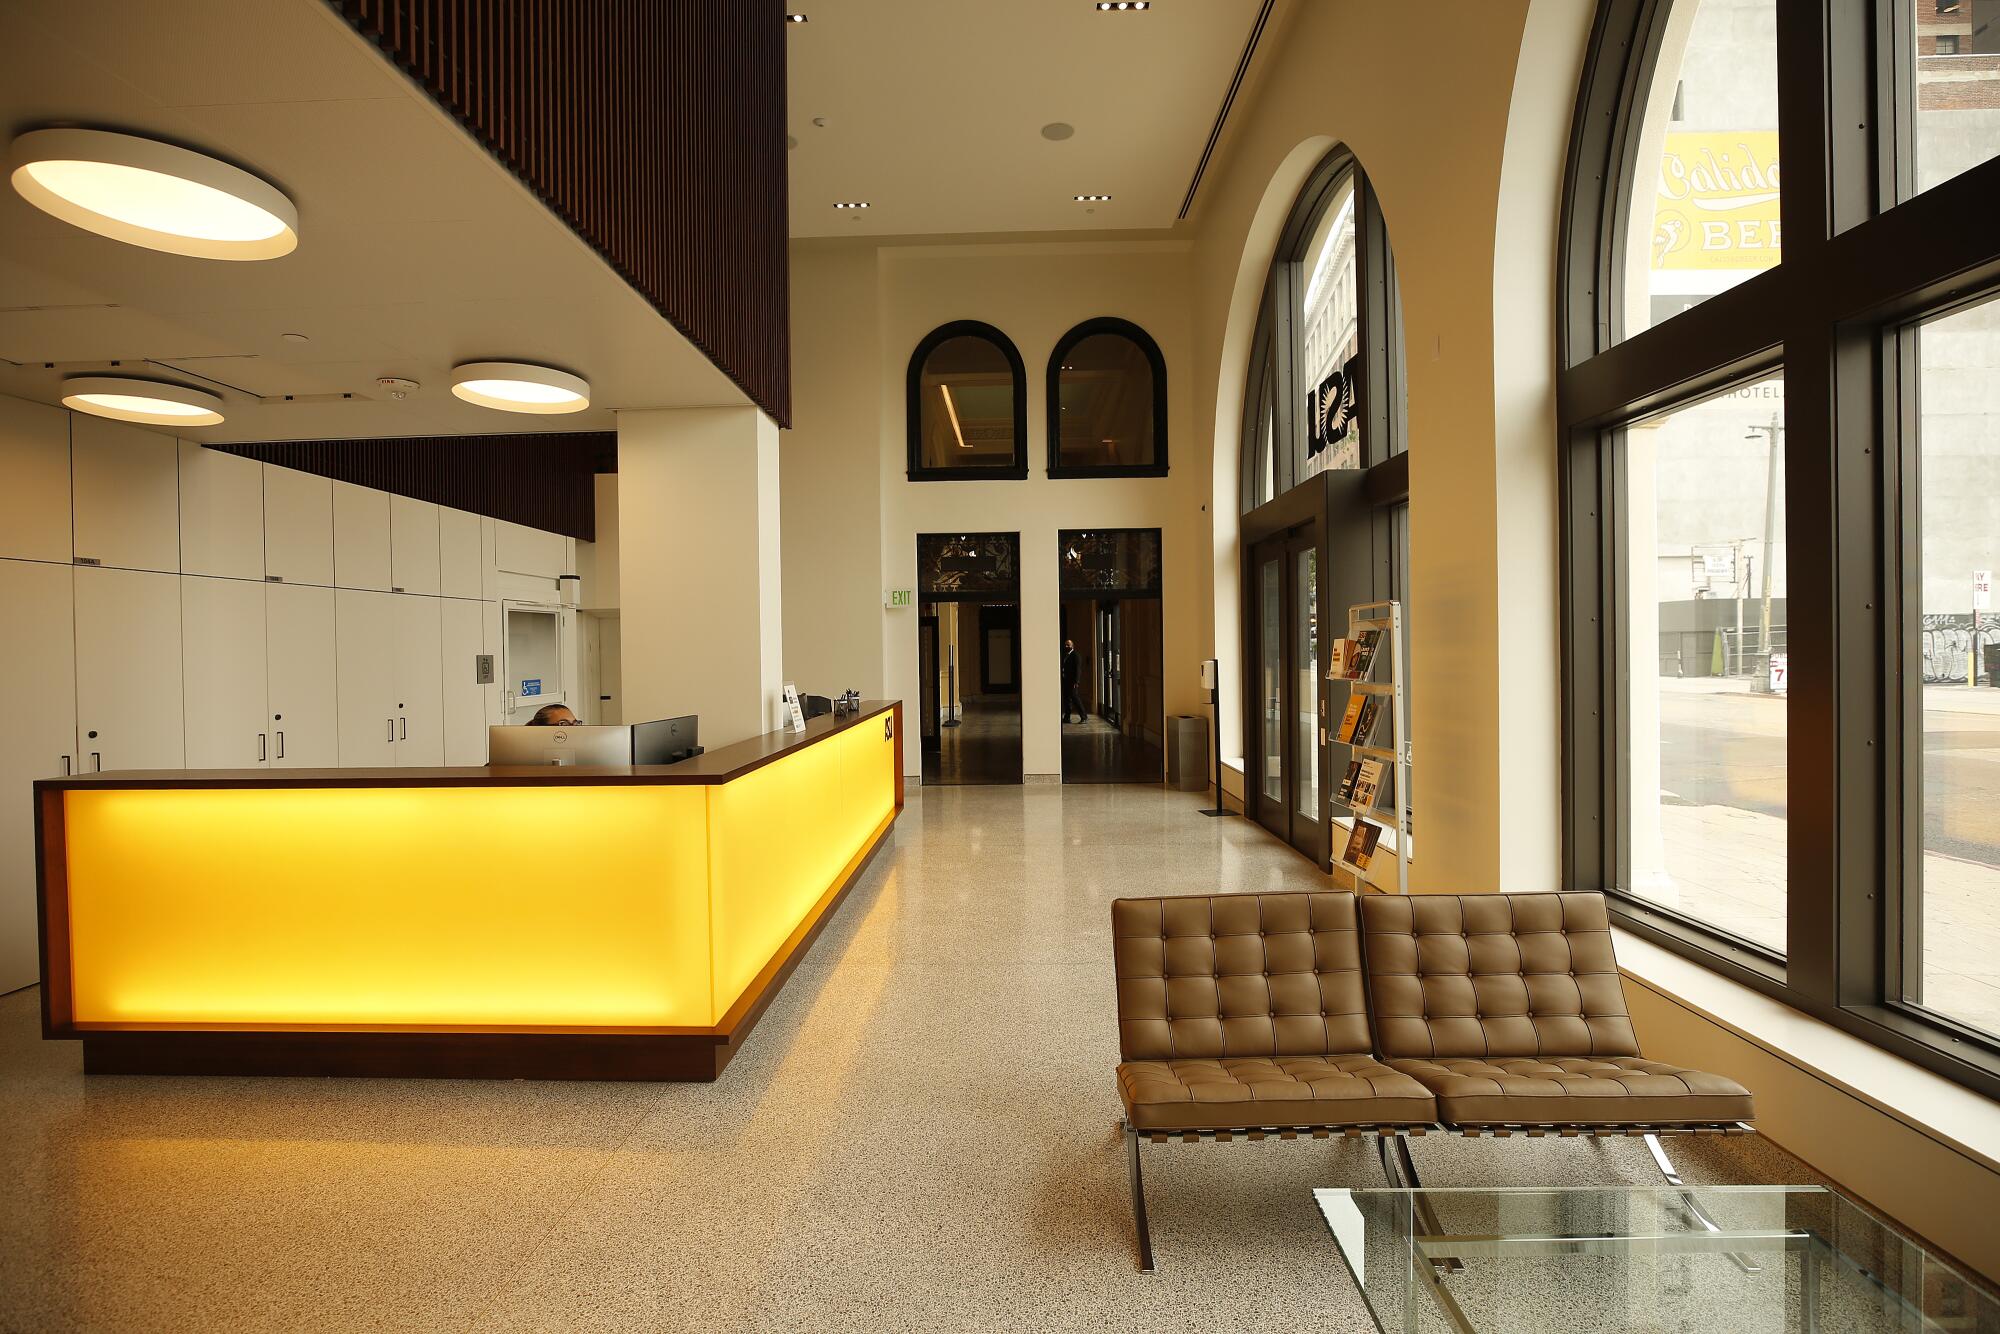 A view of ASU's new lobby area features a bright yellow counter and windows that overlook Broadway.